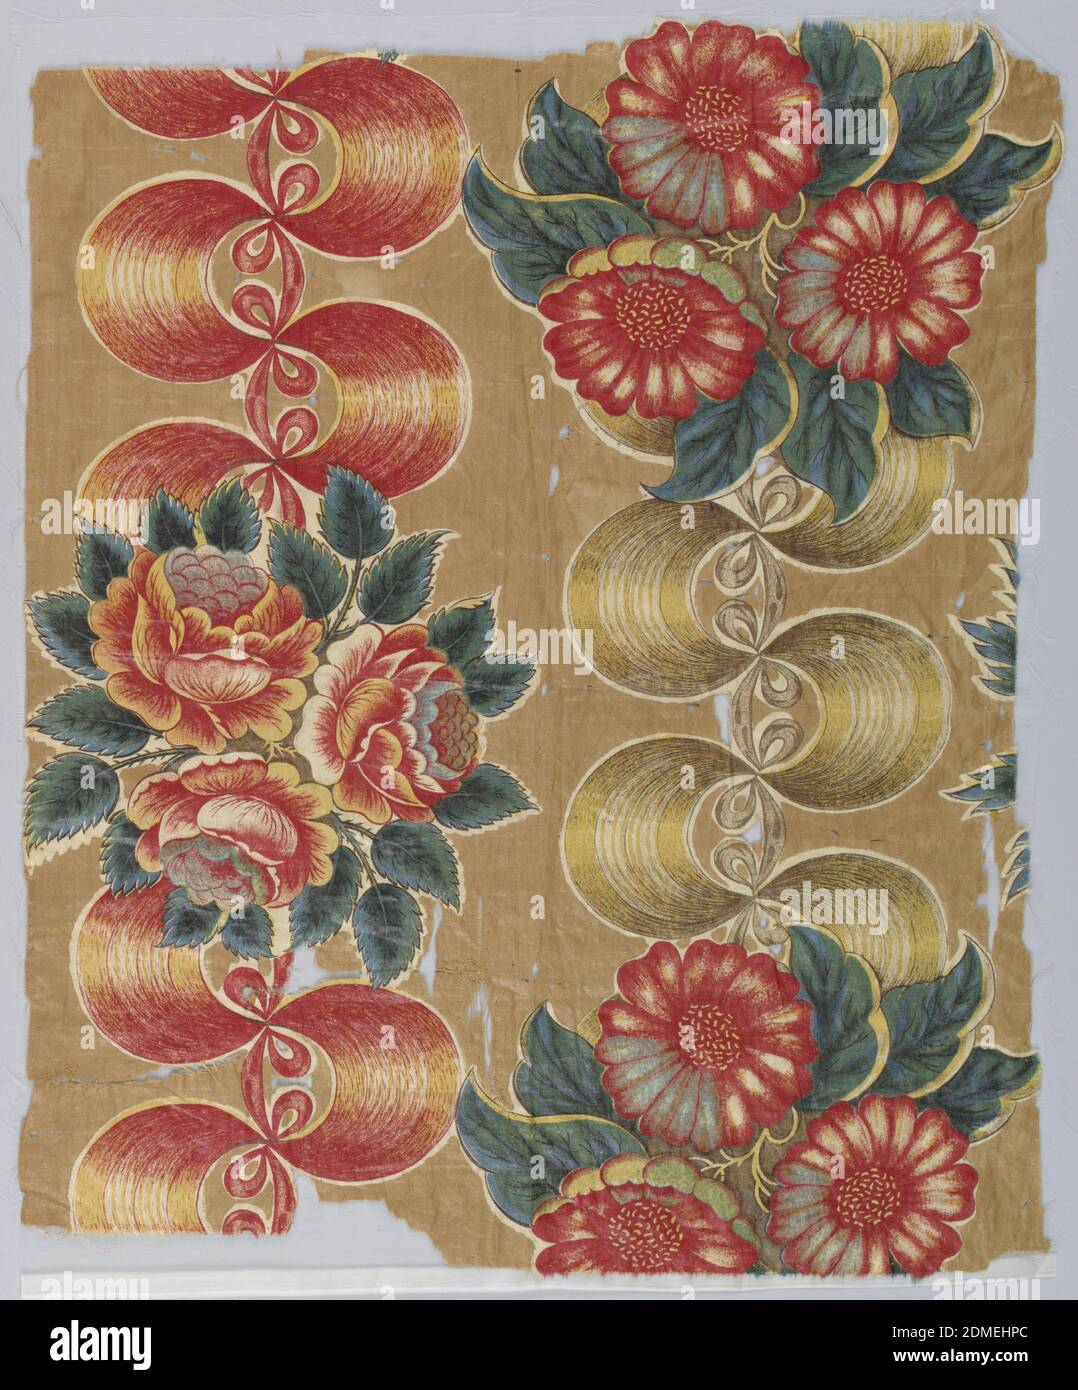 Textile, Medium: cotton Technique: printed, Lightweight glazed chintz with a tan ground printed in a pattern of natural size flower clusters in shades of red with green leaves. Clusters are in an alternate or staggered position joined by perpendicular, stiff, heavily curved ribbons with shaded effect probably by roller. Ribbons alternate in yellow or red., England, 1800–1850, printed, dyed & painted textiles, Textile Stock Photo